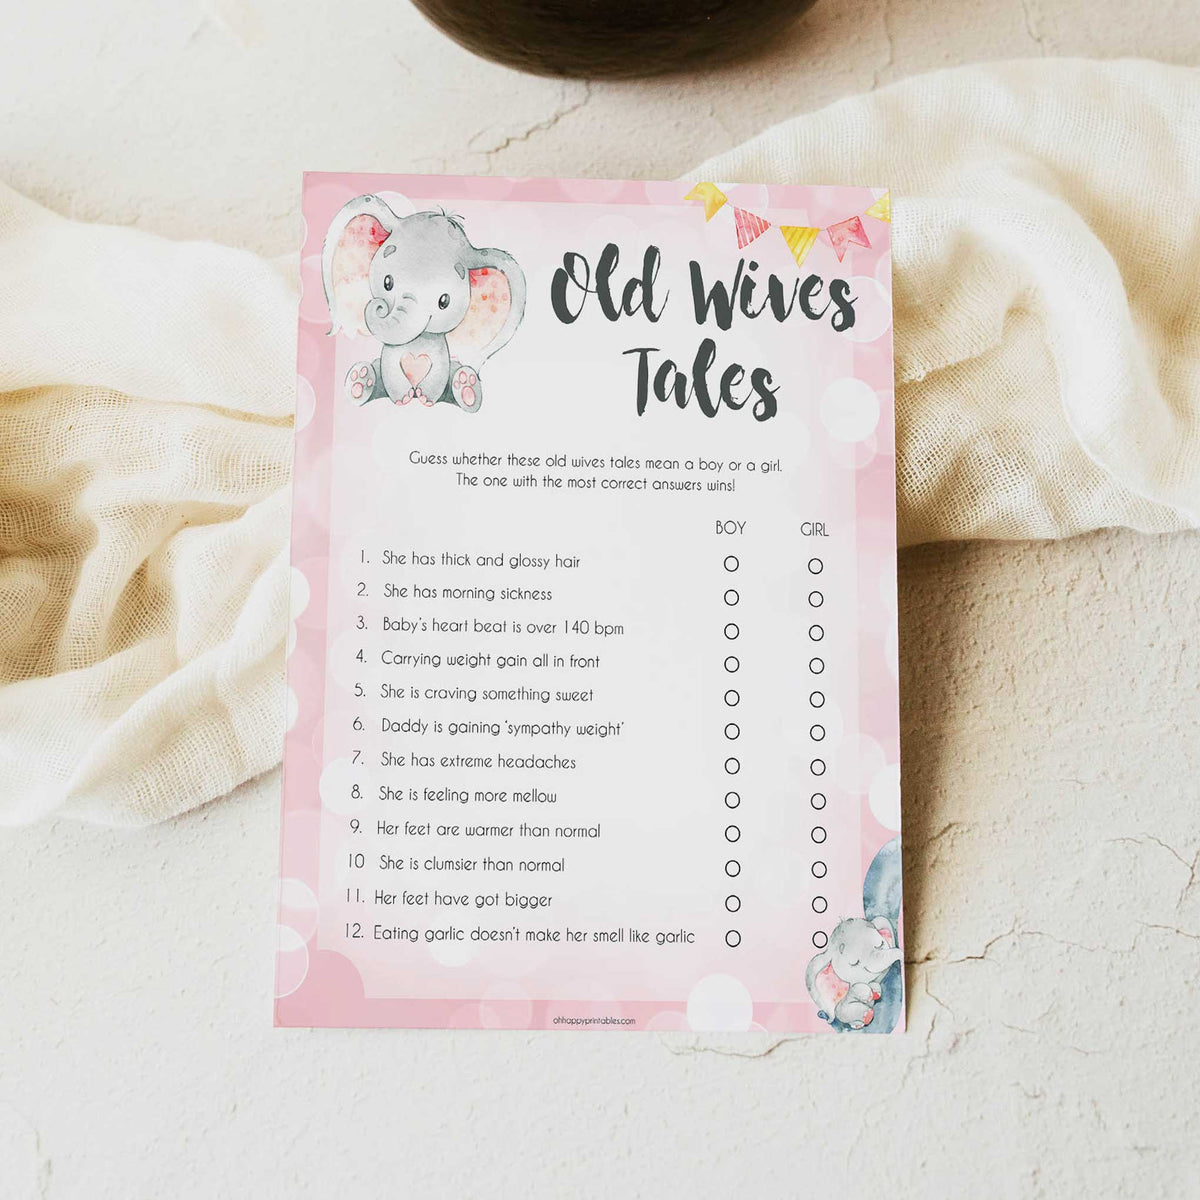 old wives tales, Printable baby shower games, fun abby games, baby shower games, fun baby shower ideas, top baby shower ideas, pink elephant baby shower, pink baby shower ideas